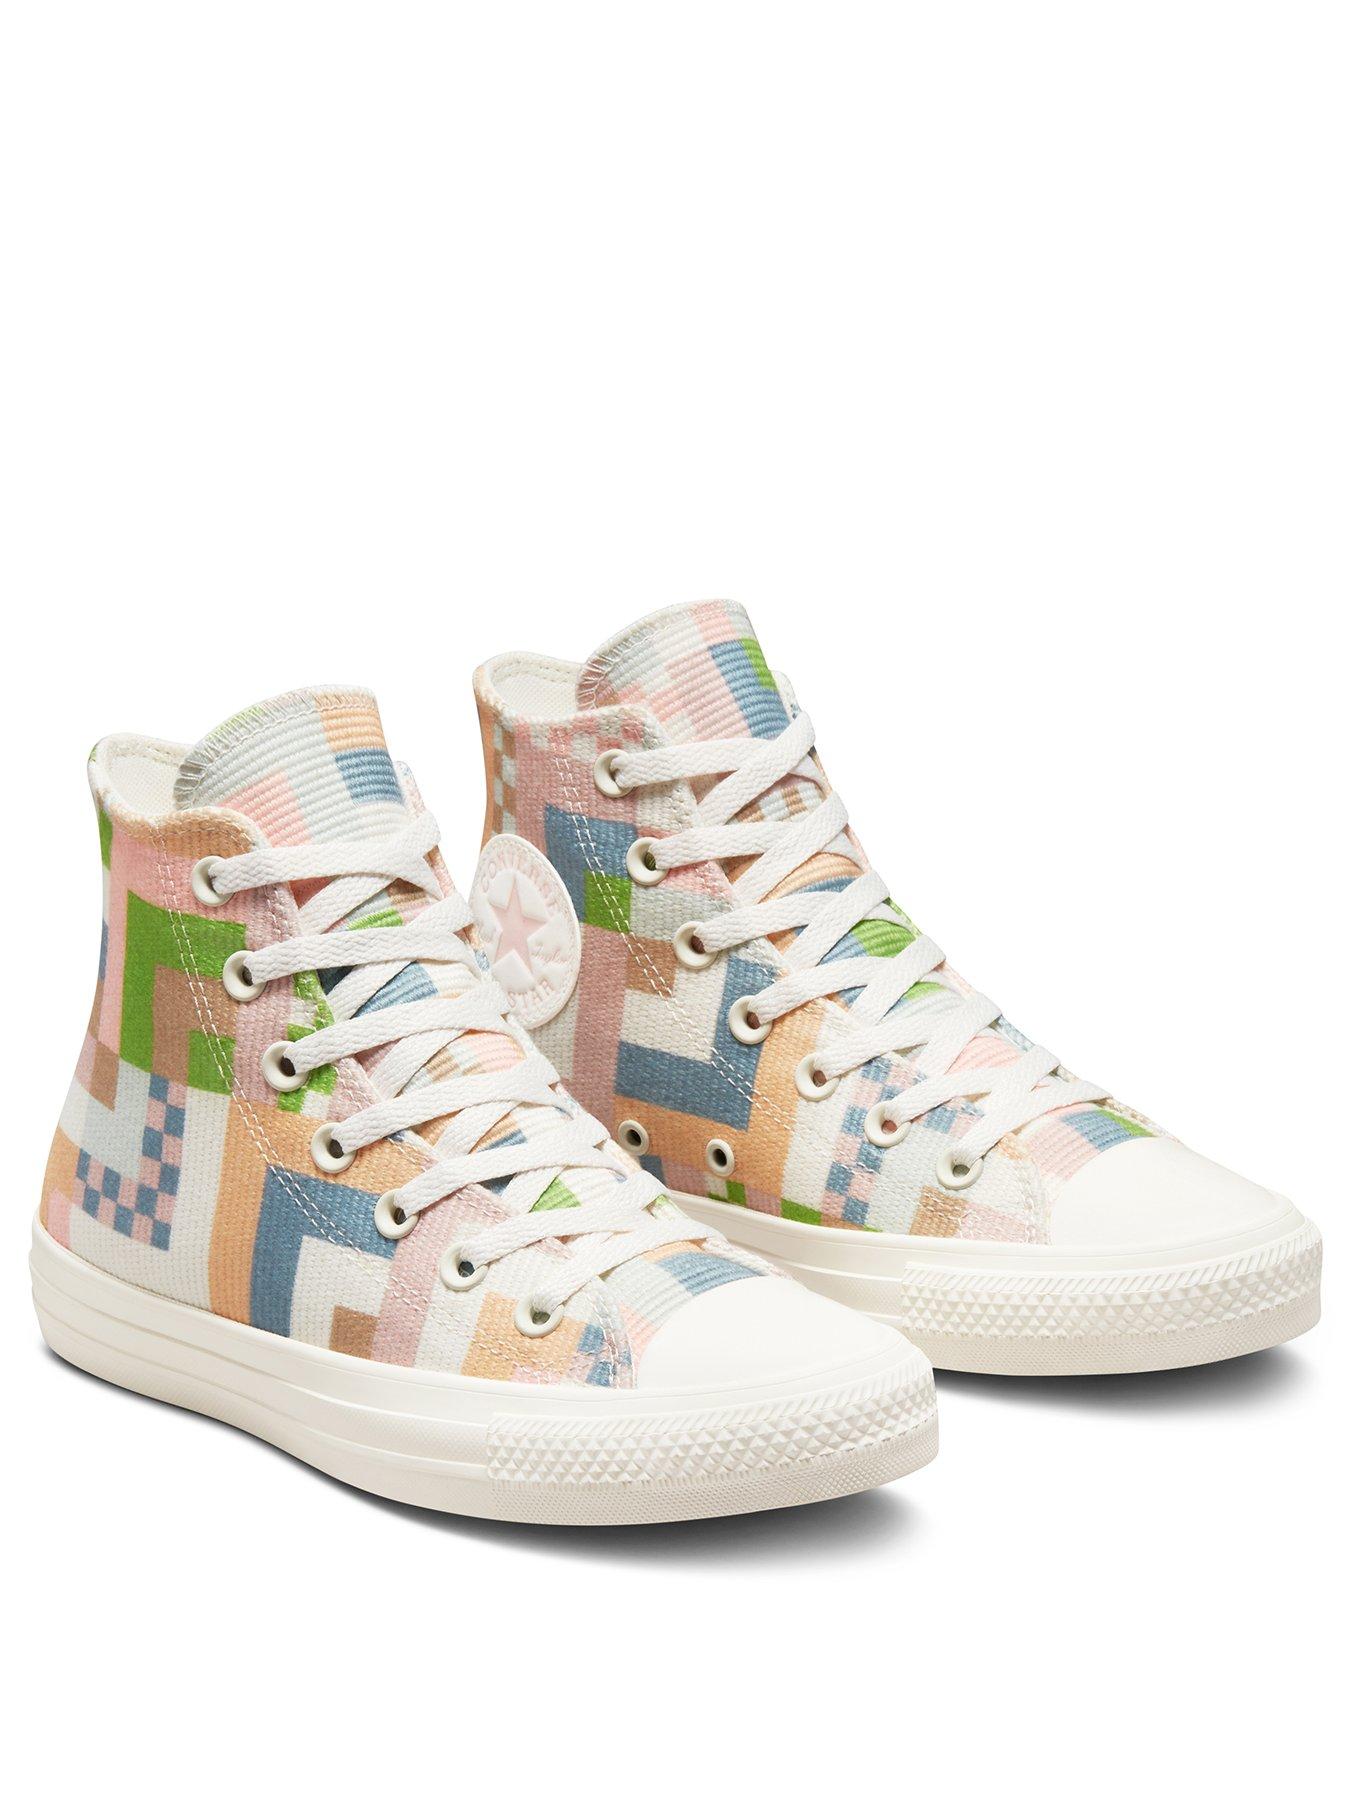 Trainers Chuck Taylor All Star Crafted Stripes Hi Top Plimsolls - Multi